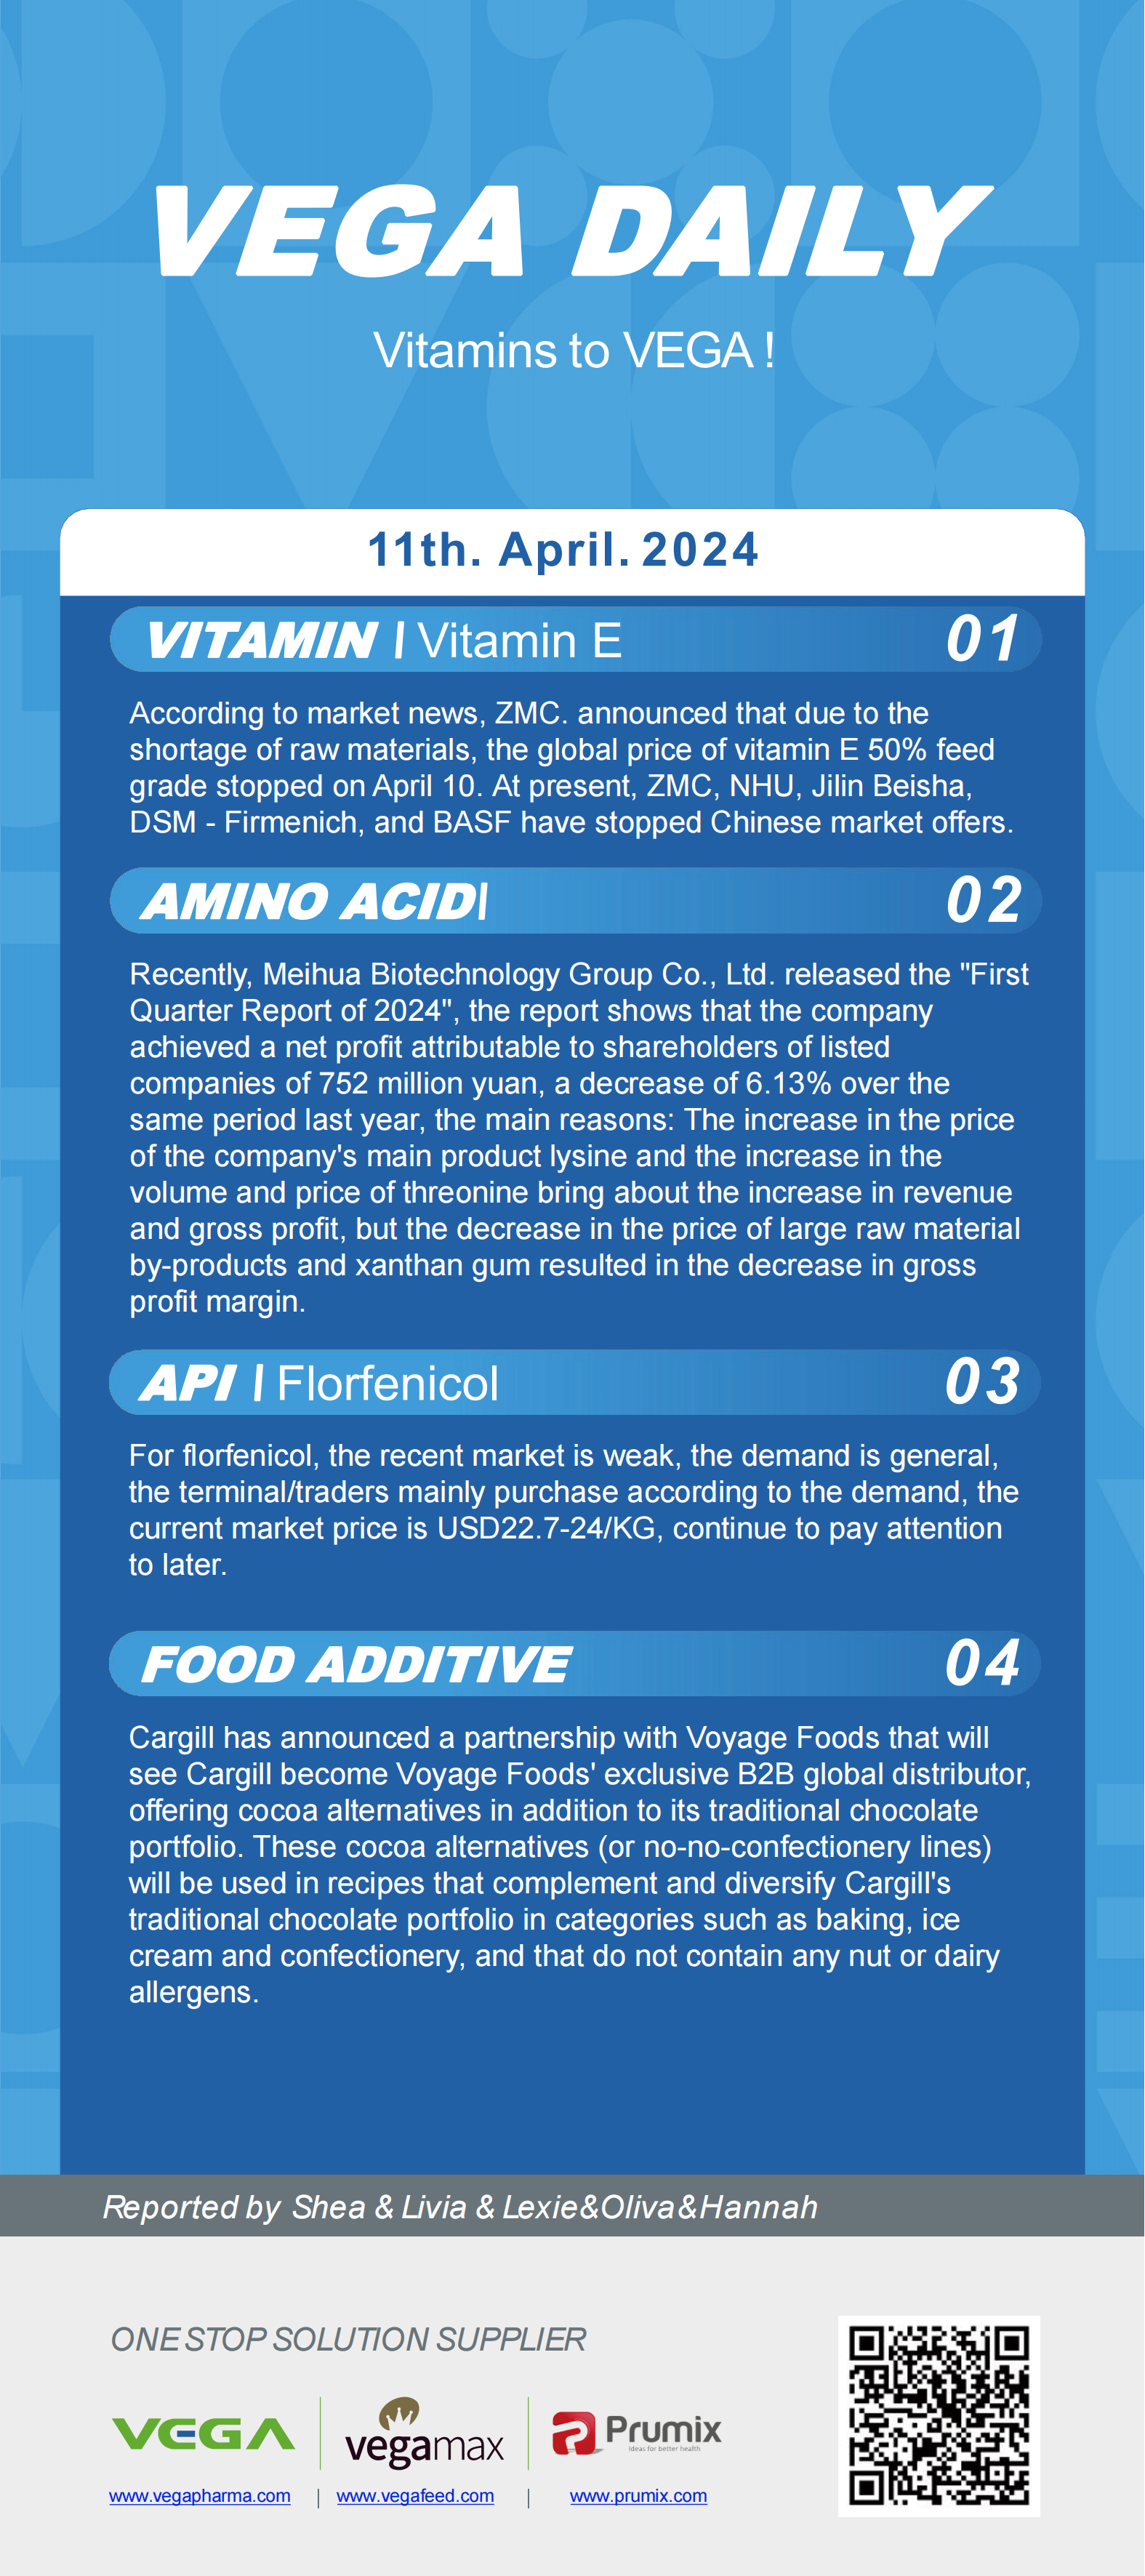 Vega Daily Dated on Apr 11th 2024 Vitamin Amino Acid APl Food Additives.png